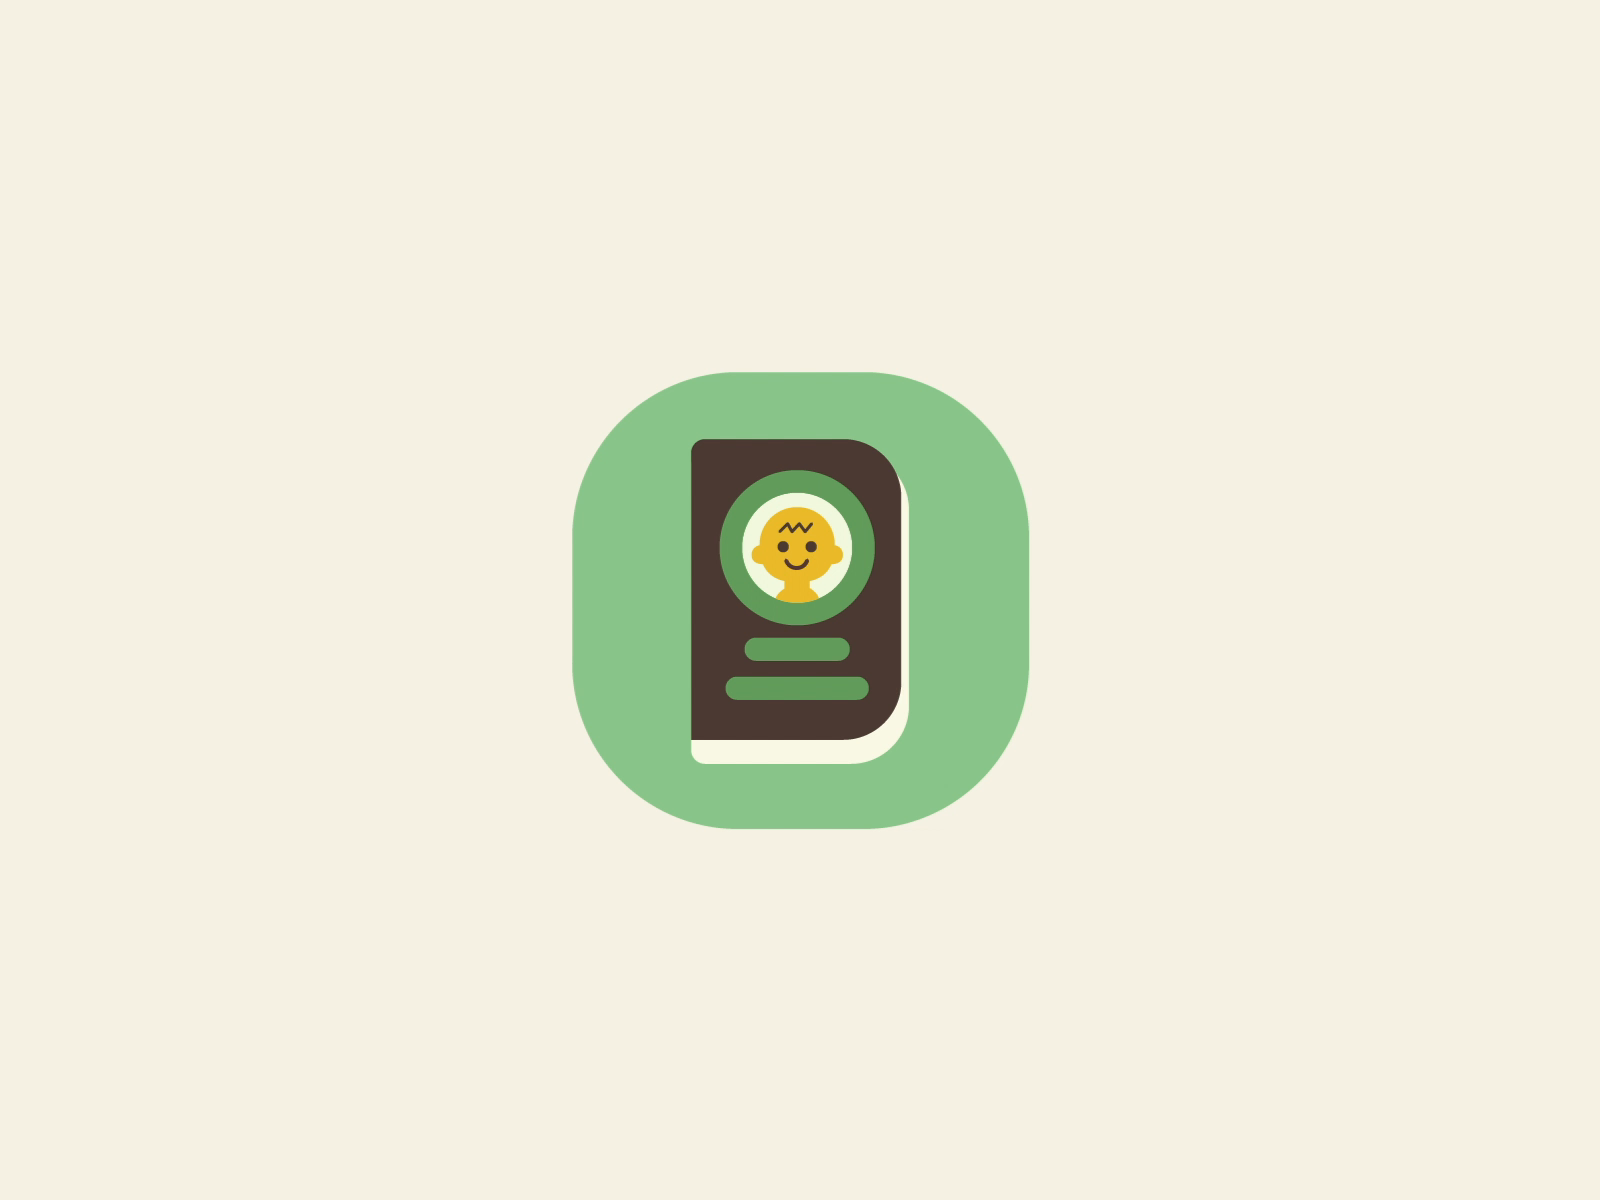 Nook Phone Icons by Alanna Munro on Dribbble